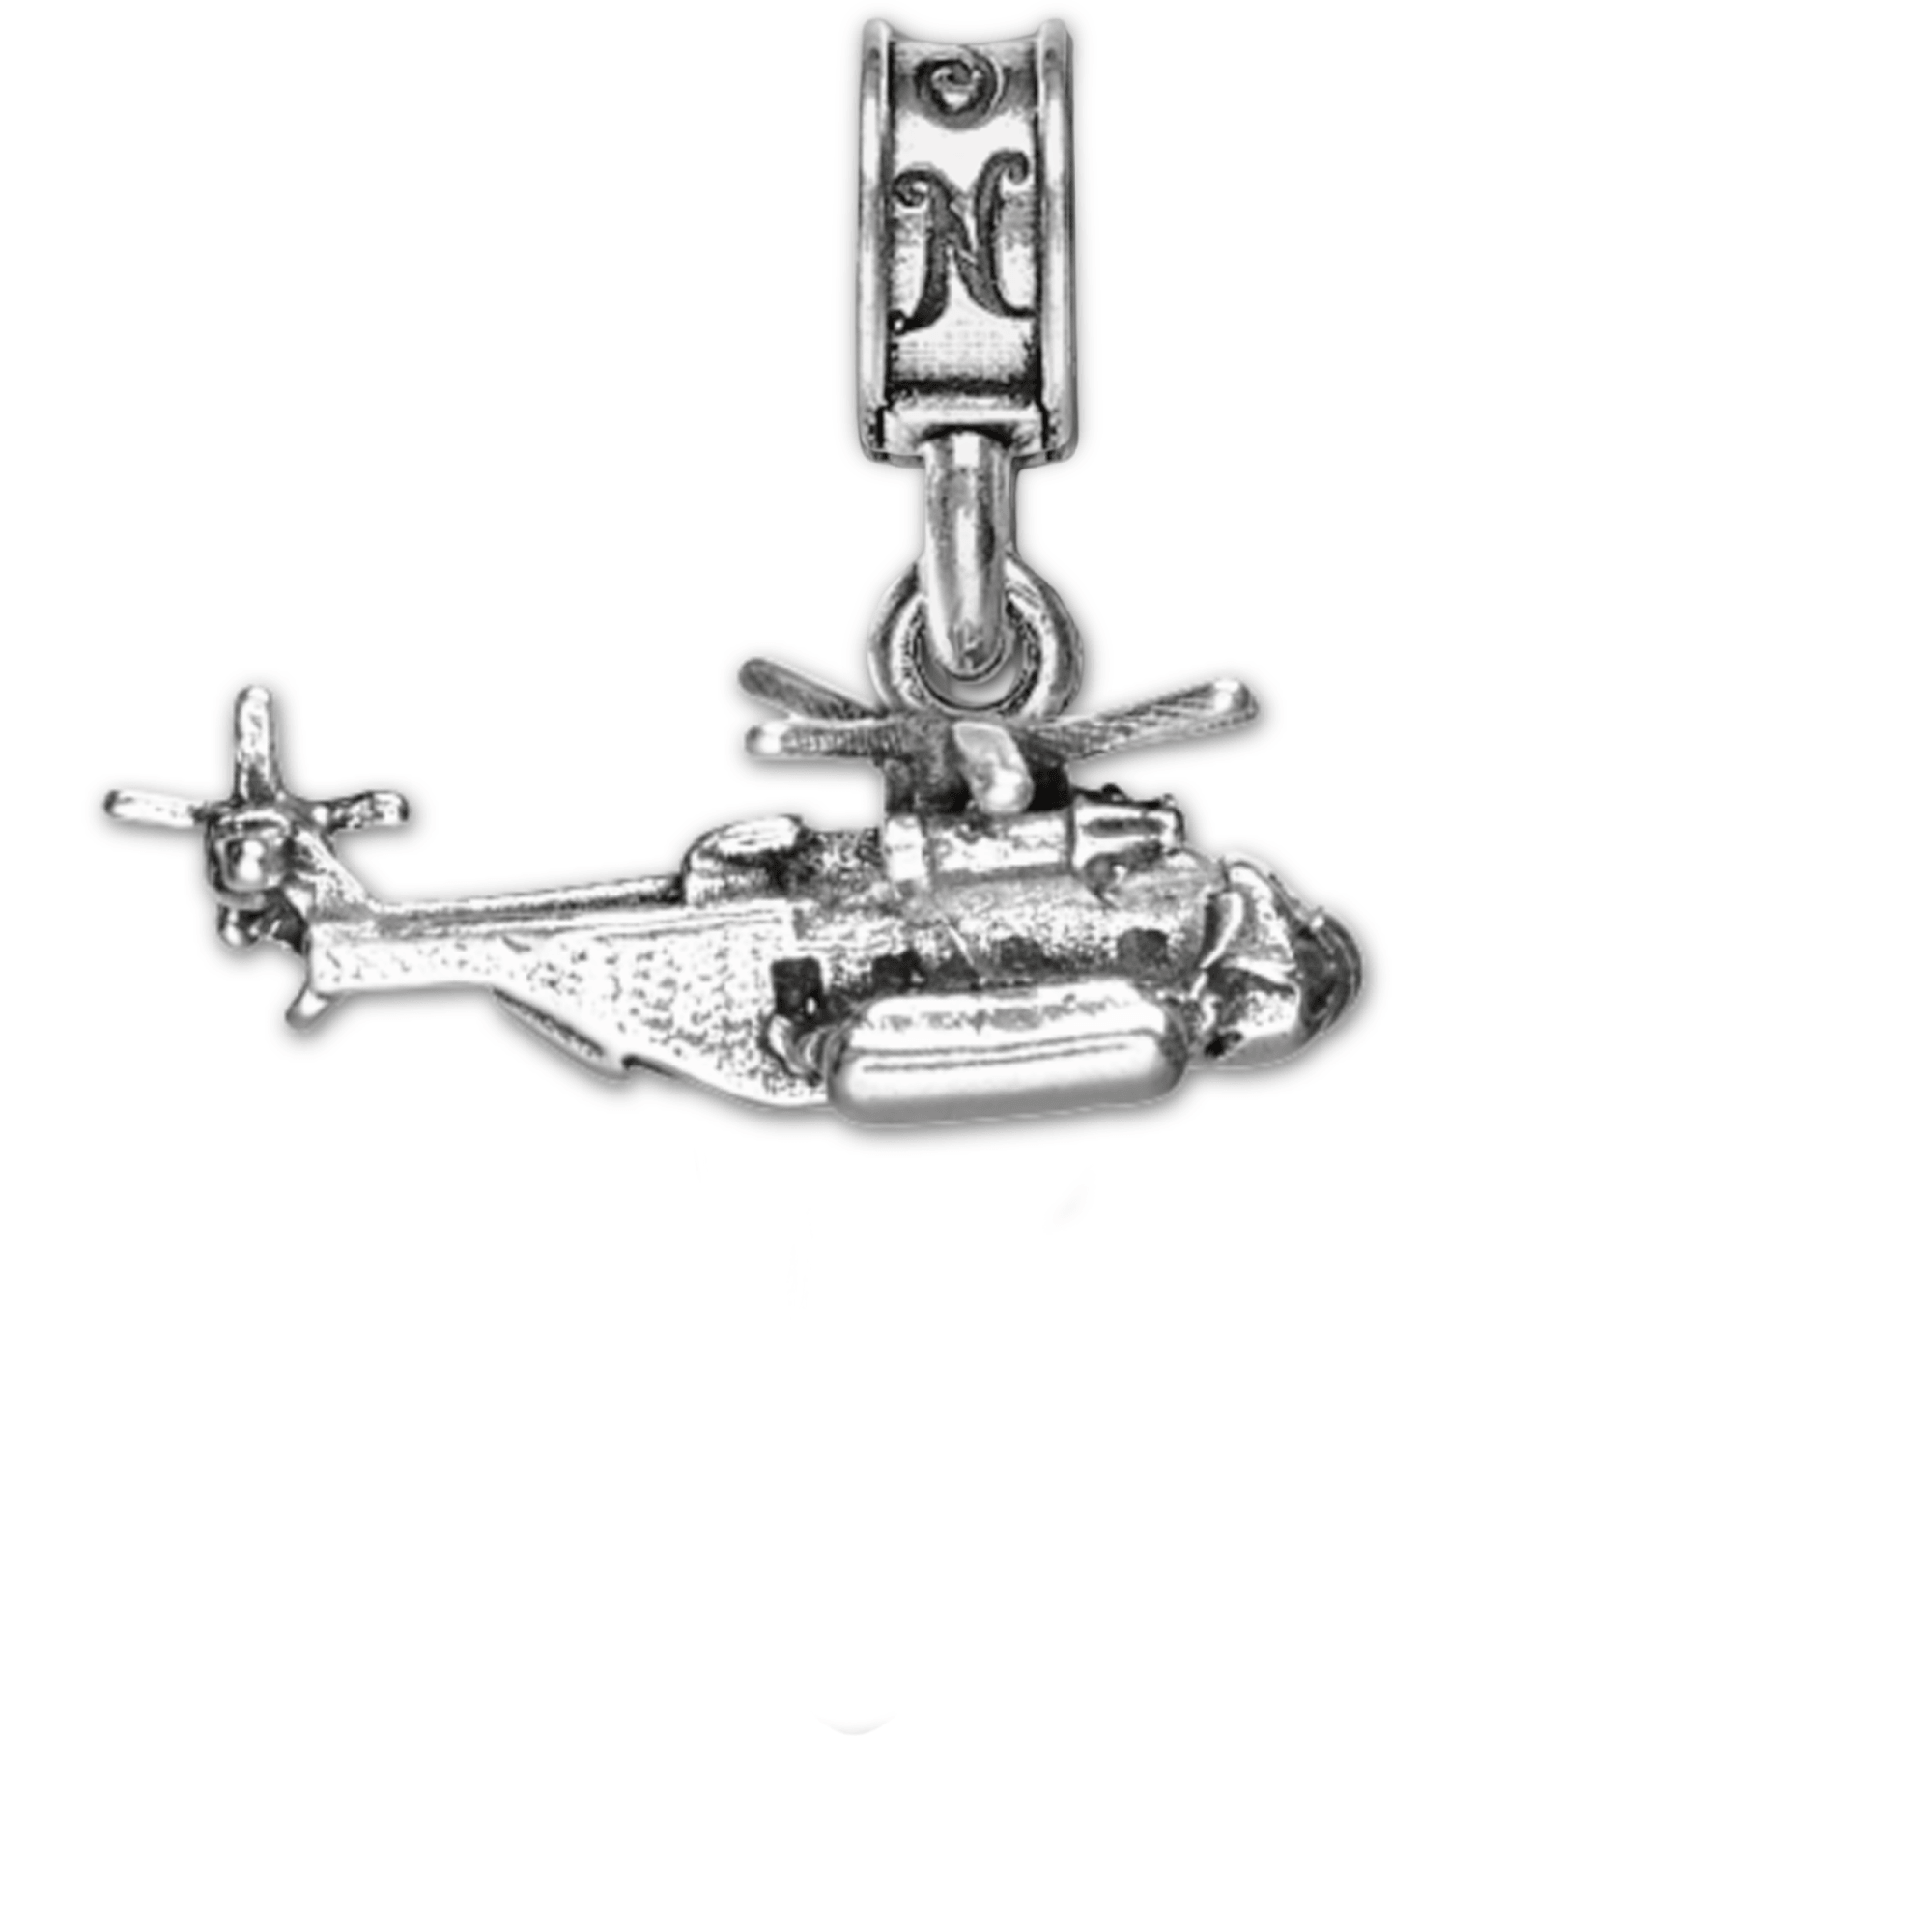 Military Jewelry, Military Charms, Military Gifts, Military Aviation, CH-53E Helicopter Charm